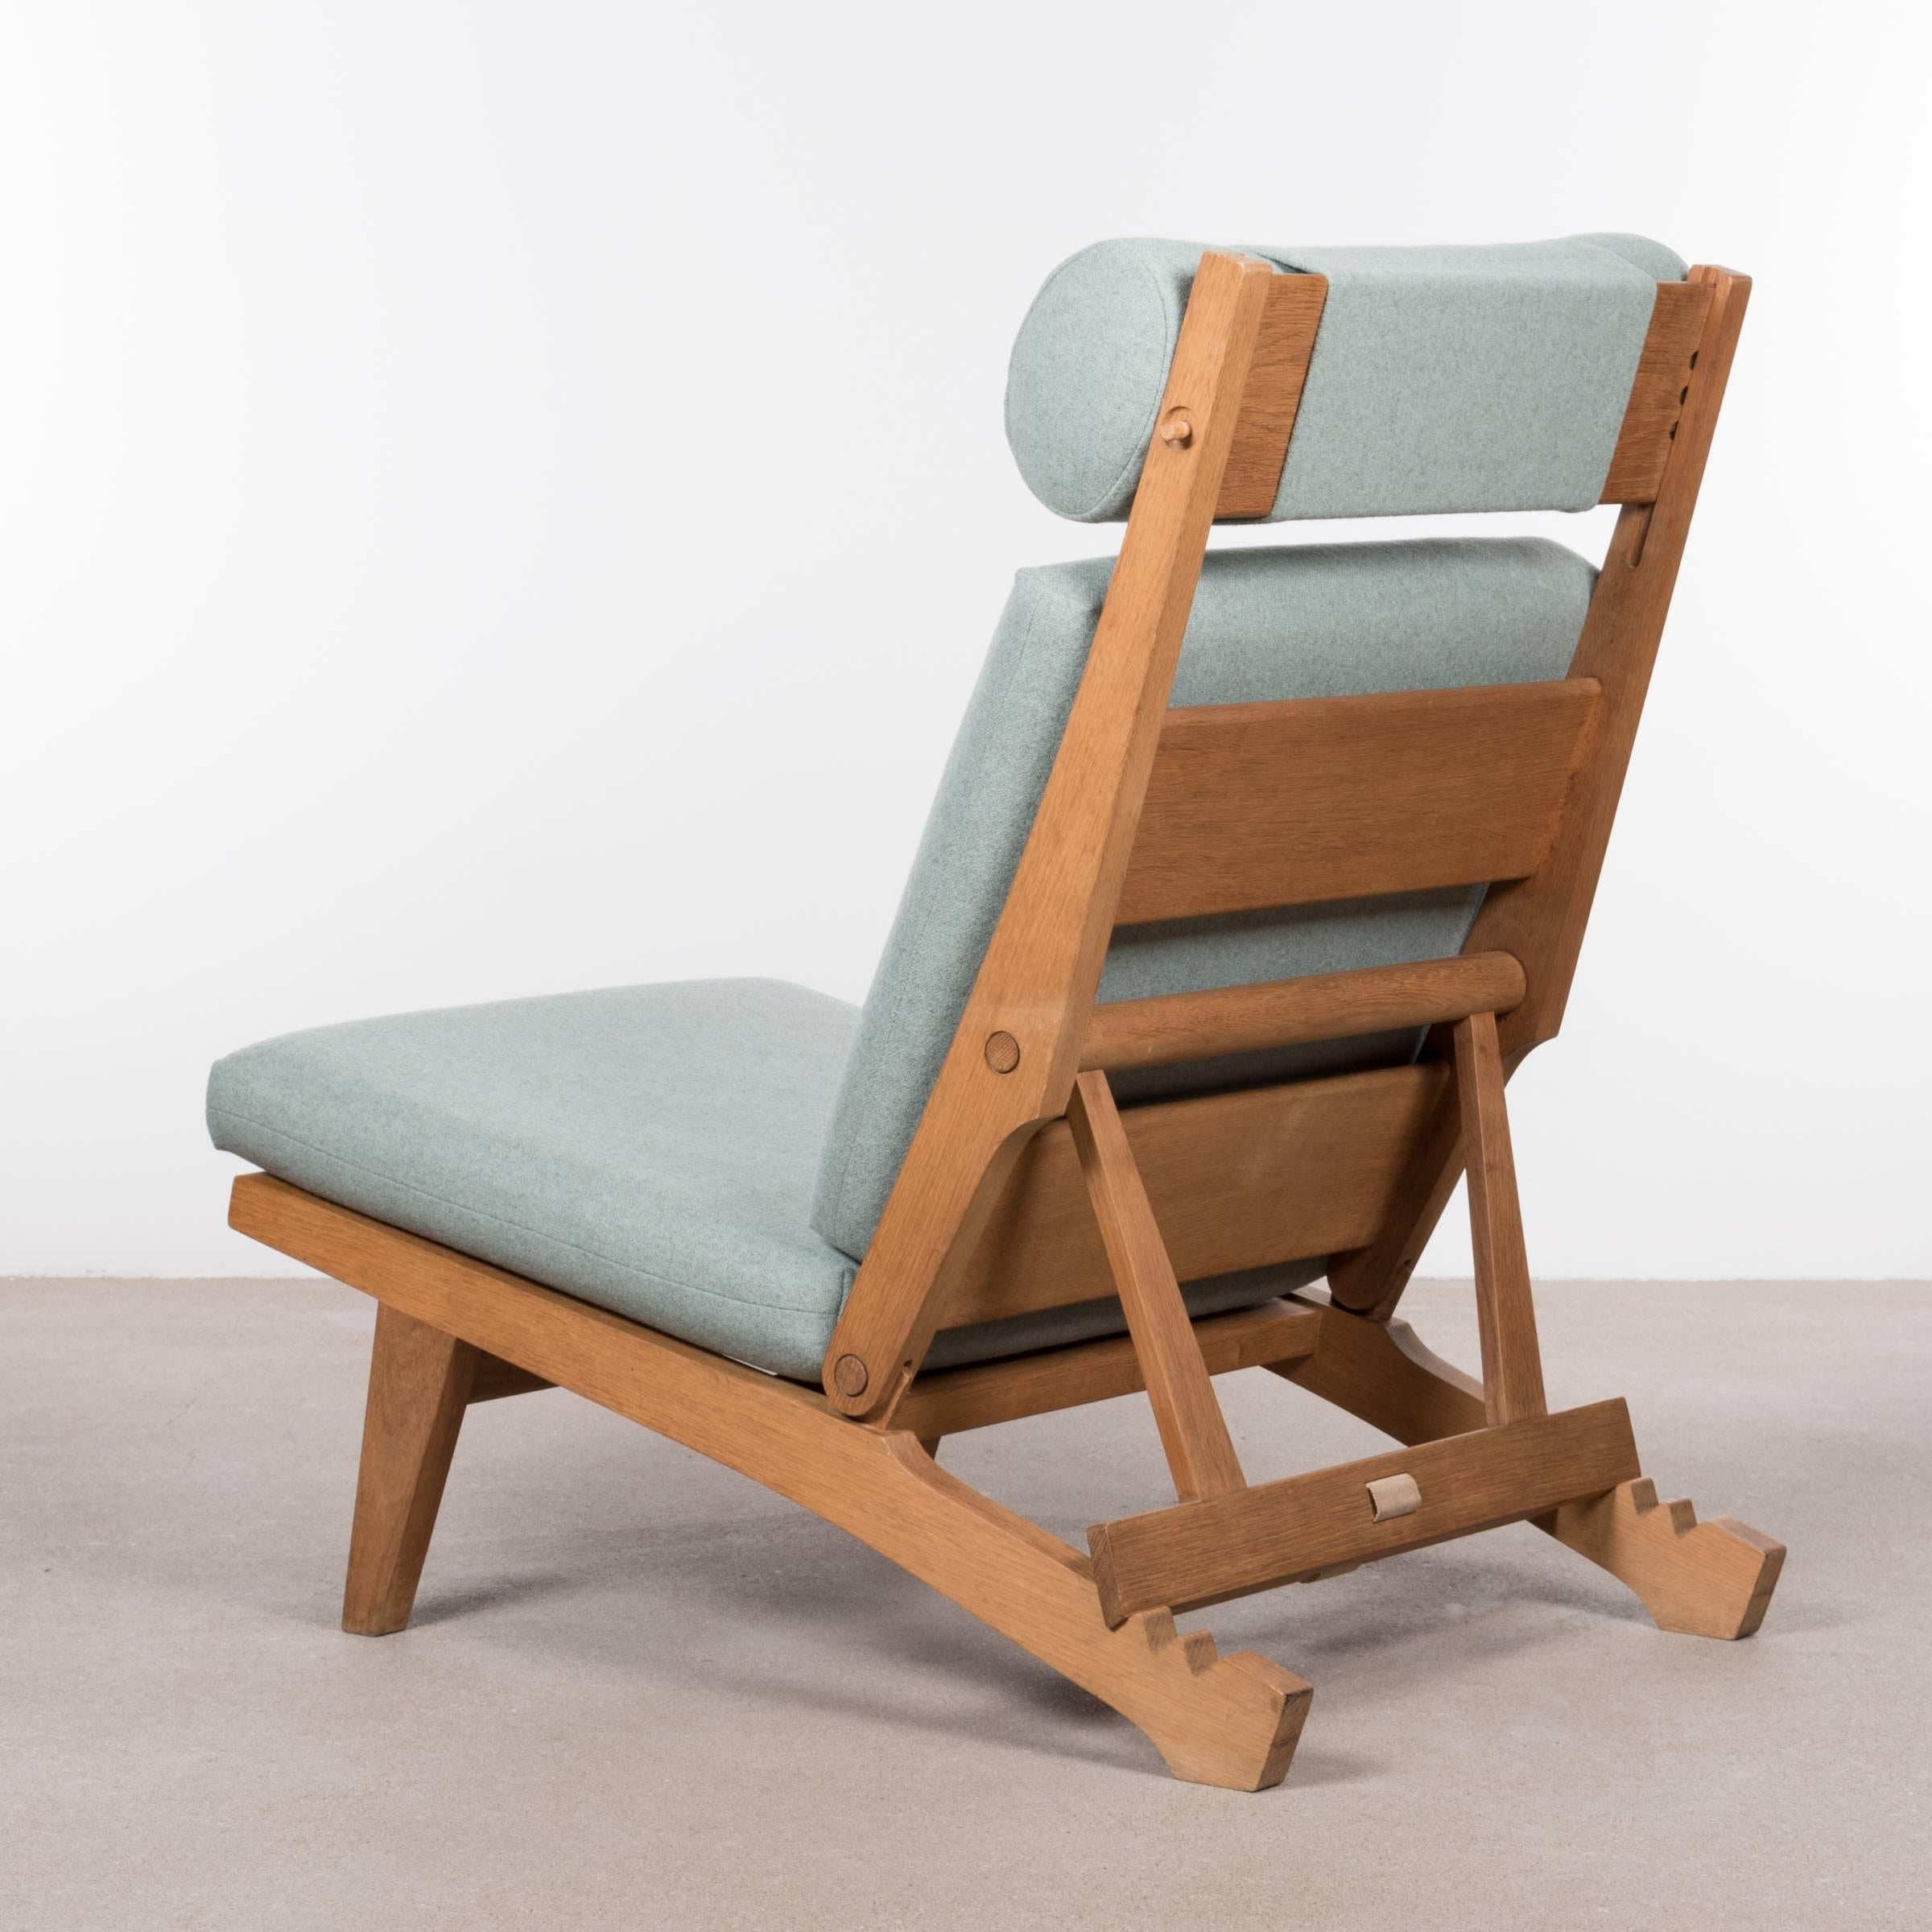 Hans Wegner AP71 folding lounge chair designed in 1968. Adjustable back- and headrest in three positions. Solid oak frame, papercord seating and new sea foam green cushions (Kvadrat Tonus) all in very good / excellent condition. Multiple chairs